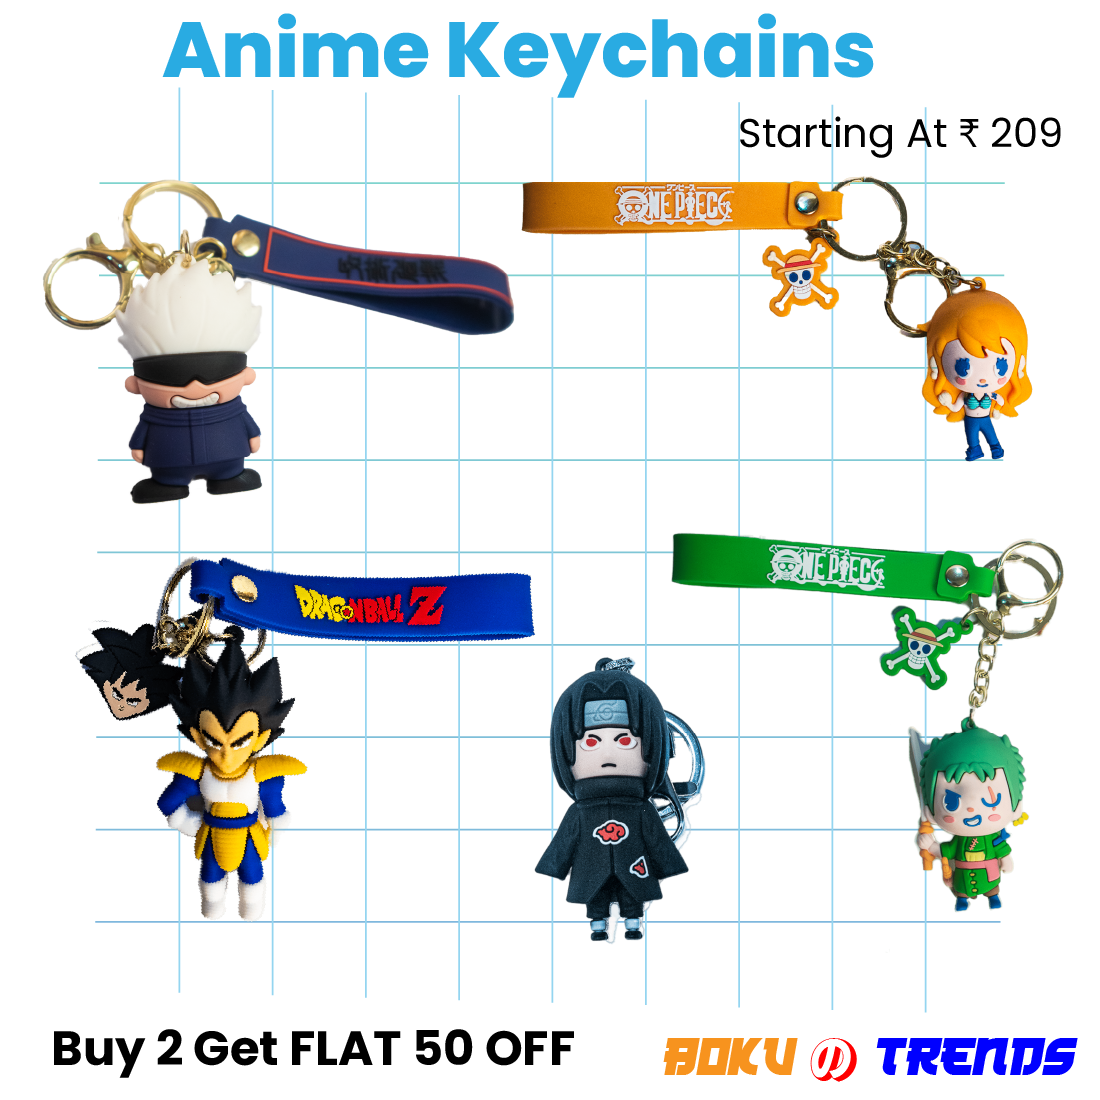 Cute Anime Themed Keychains Starting At Just 199! on Bokunotrends.com